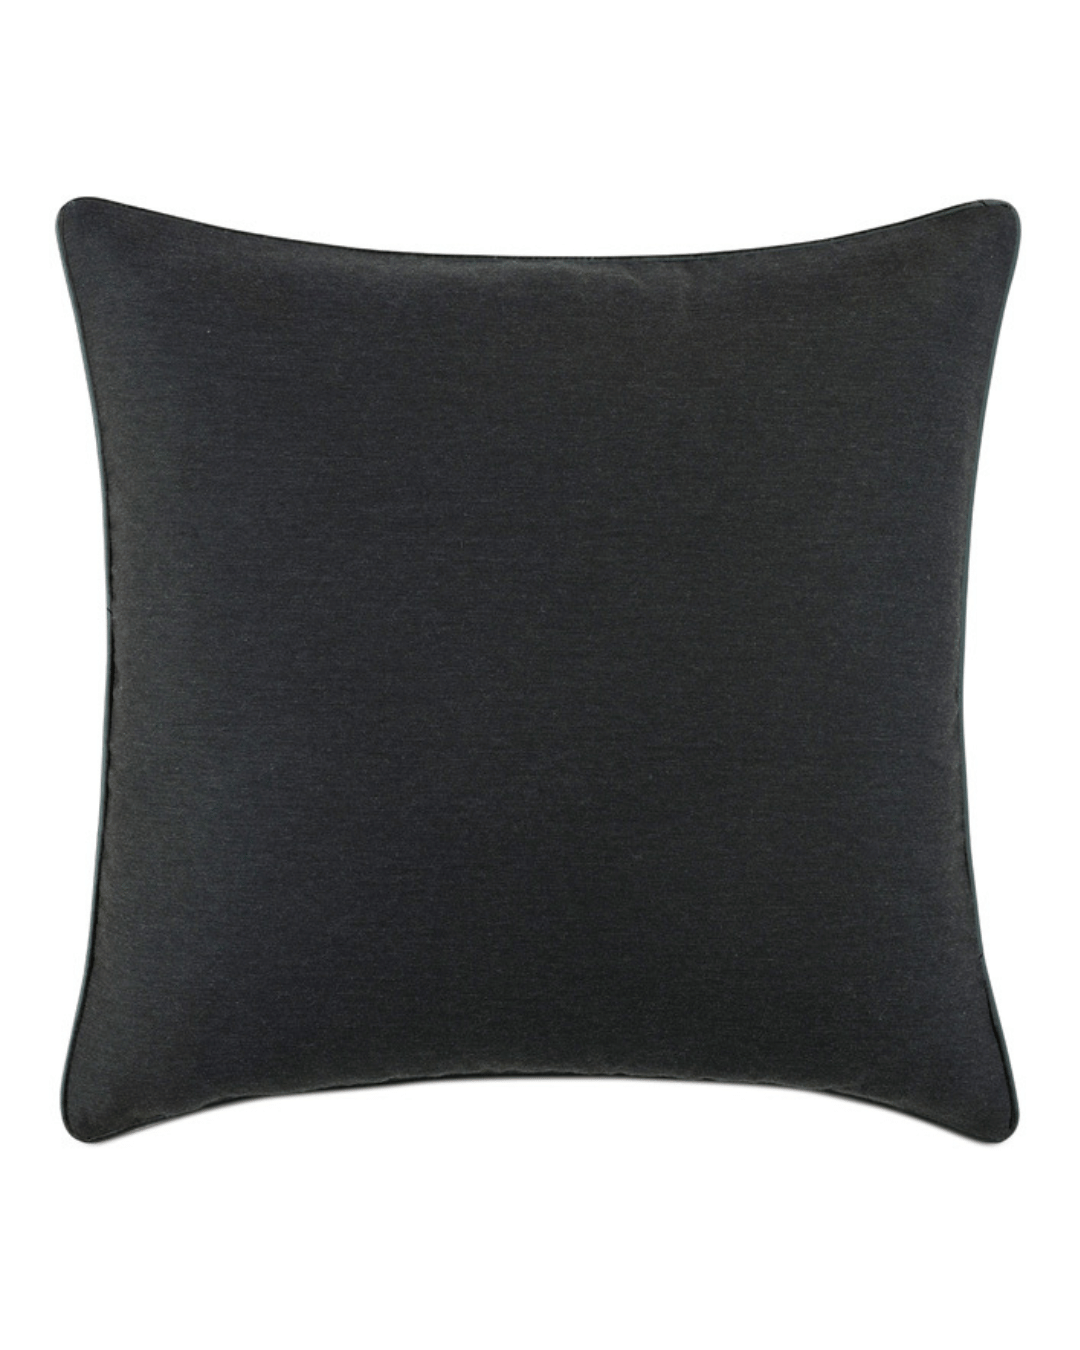 Ban Solid Black Pillow